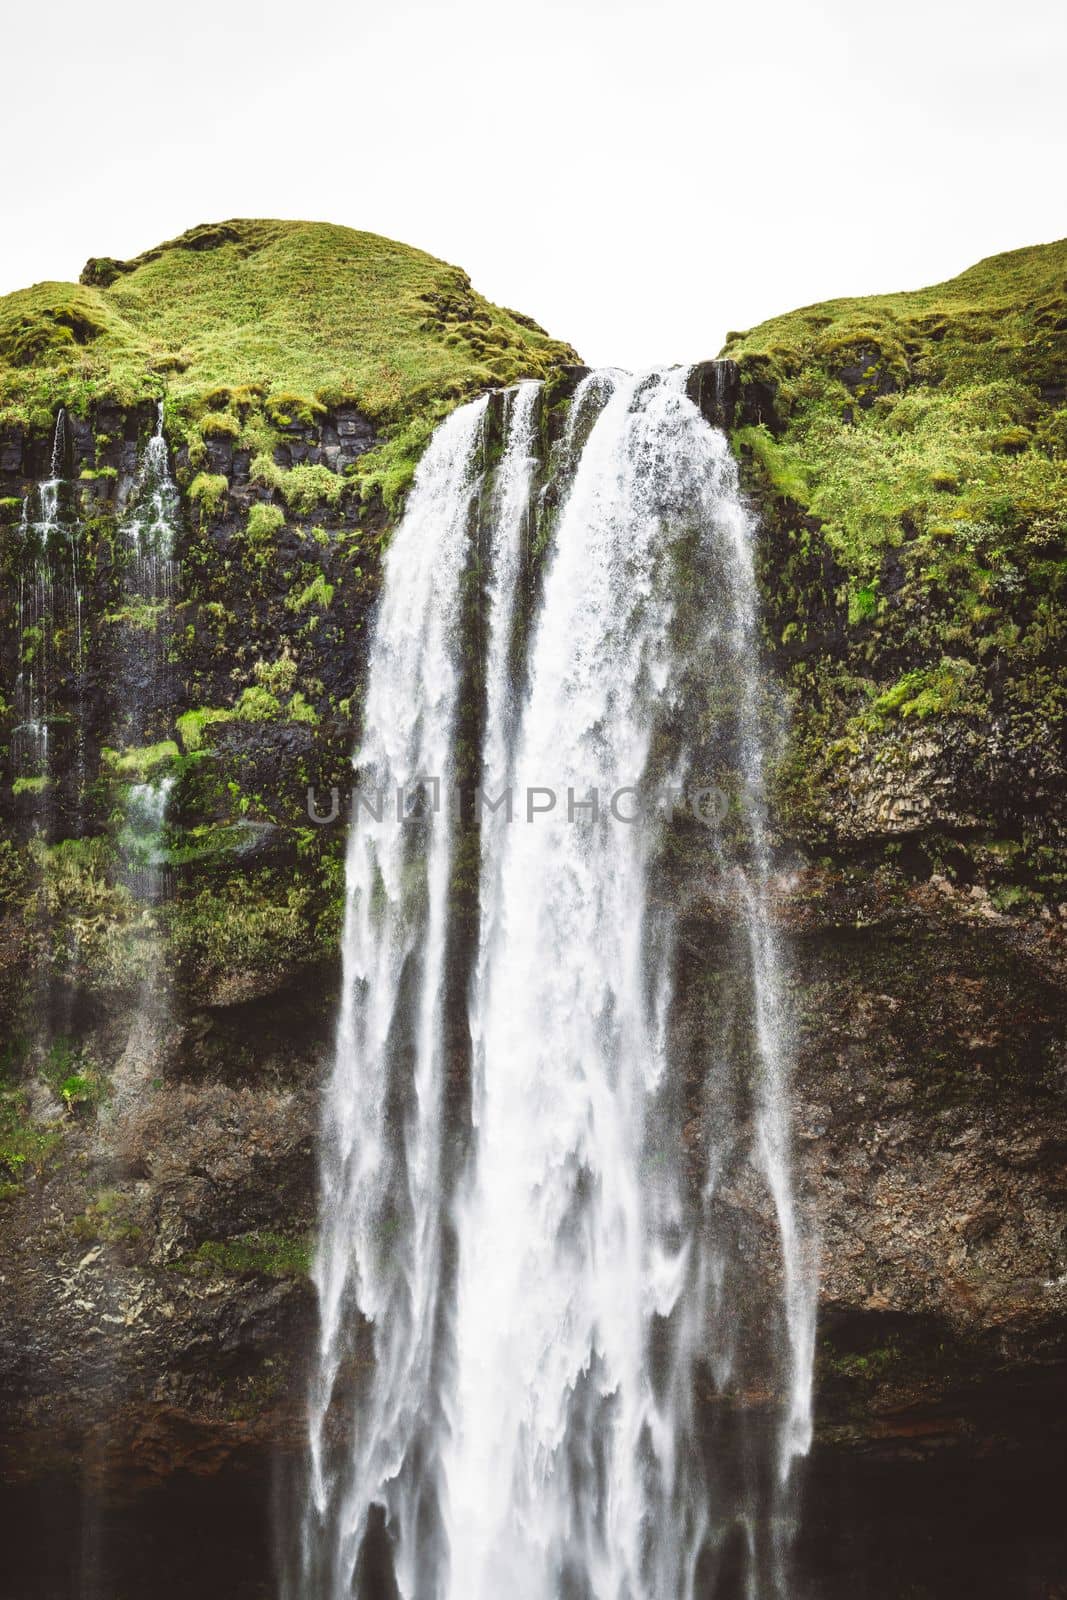 Vertical photo perfect view of famous powerful Gljufrabui cascade in sunlight. Dramatic and gorgeous scene. Unique place on earth. Location place Iceland, sightseeing Europe. Explore the world's beauty and wildlife. High quality photo